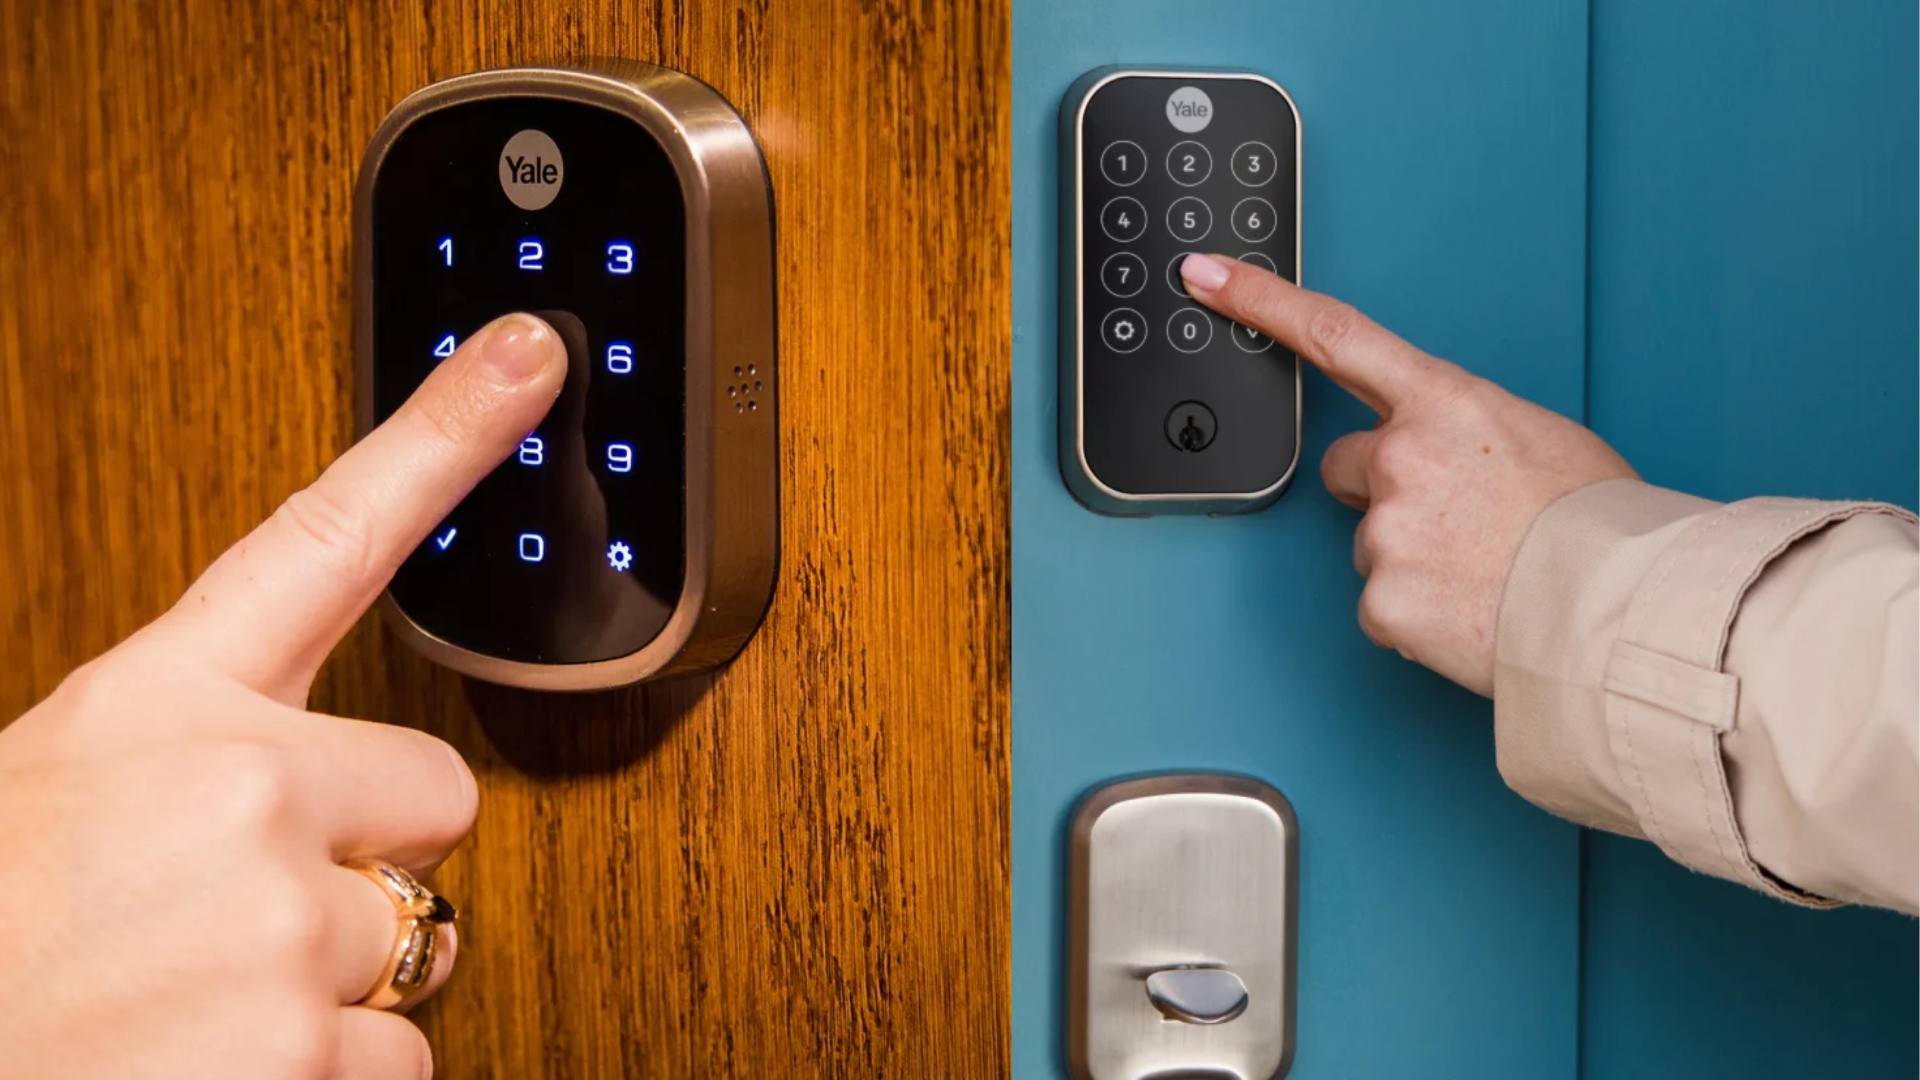 Two different Yale keyless entry door locks illustrate modern security technology in a residential setting.